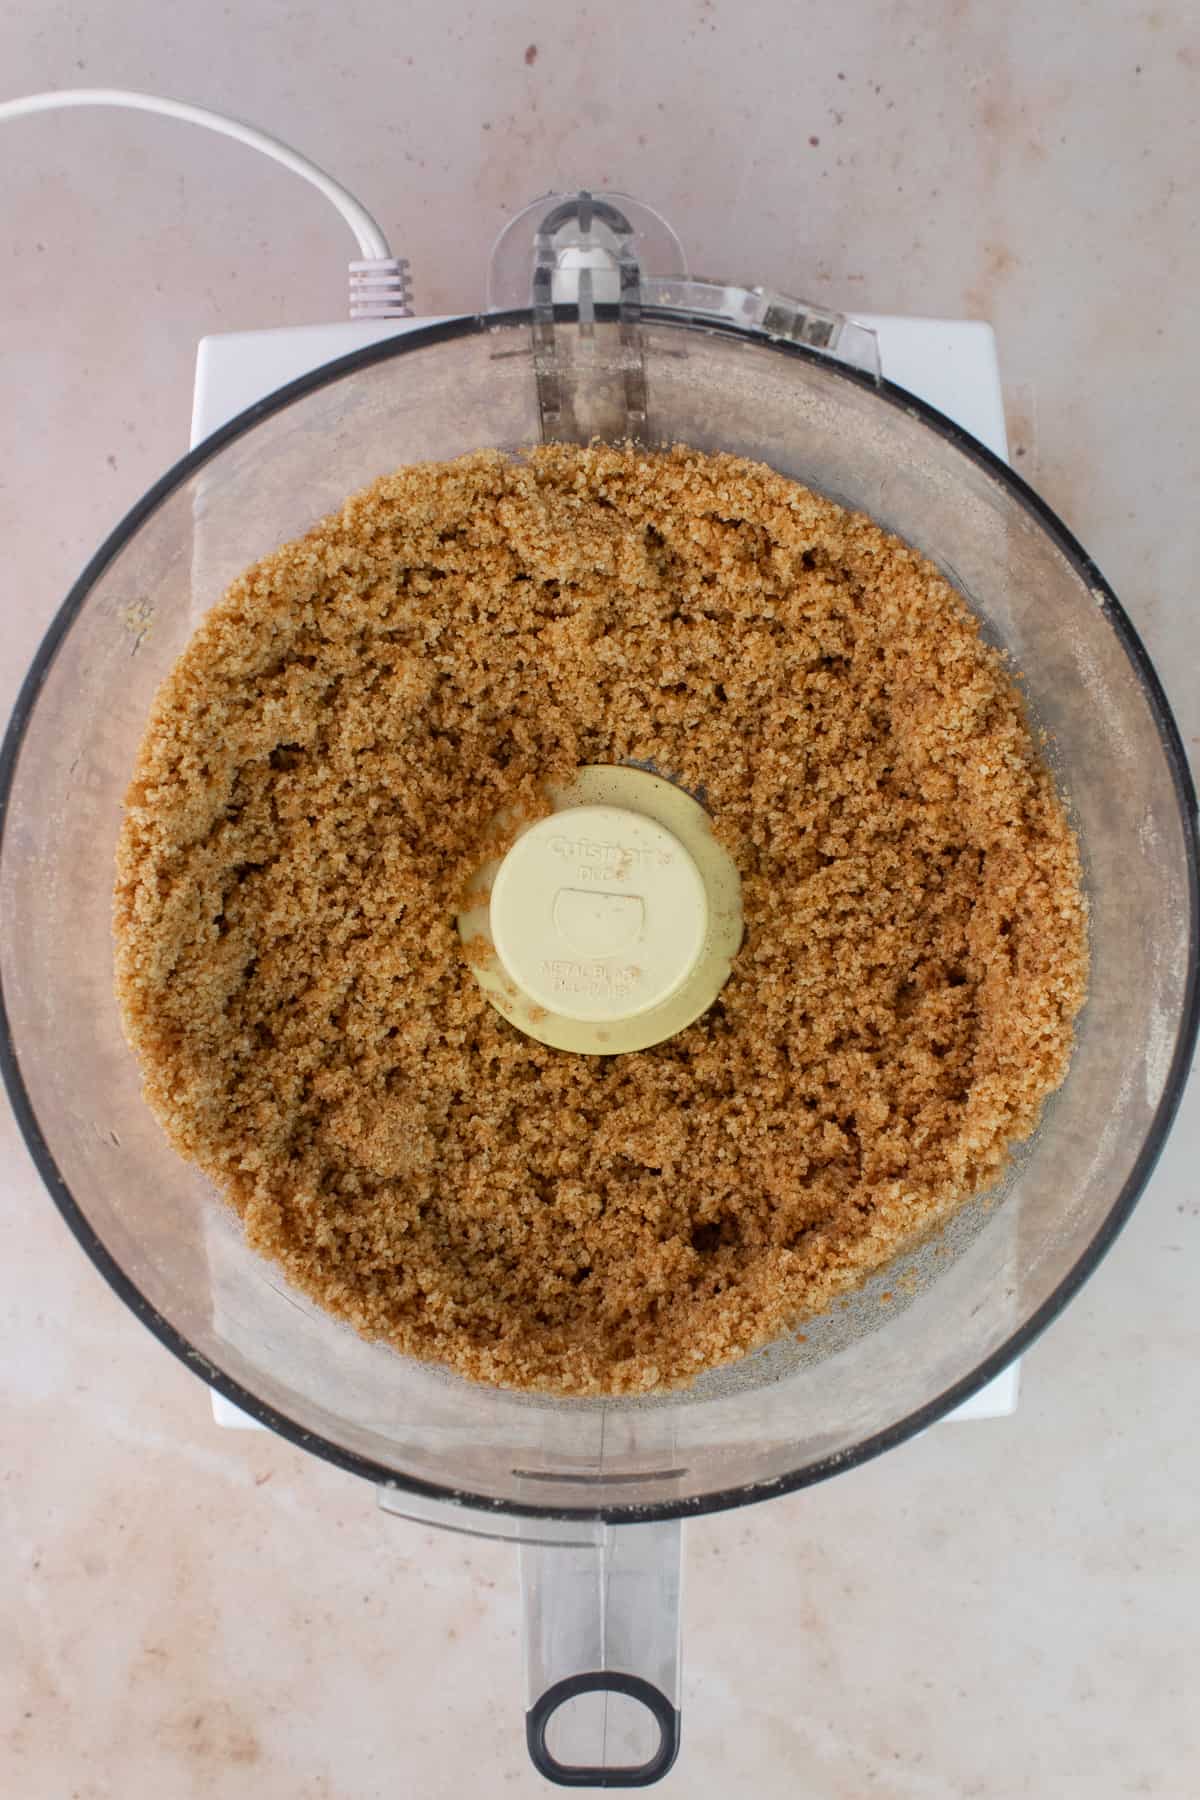 Graham cracker crumbs are in a food processor